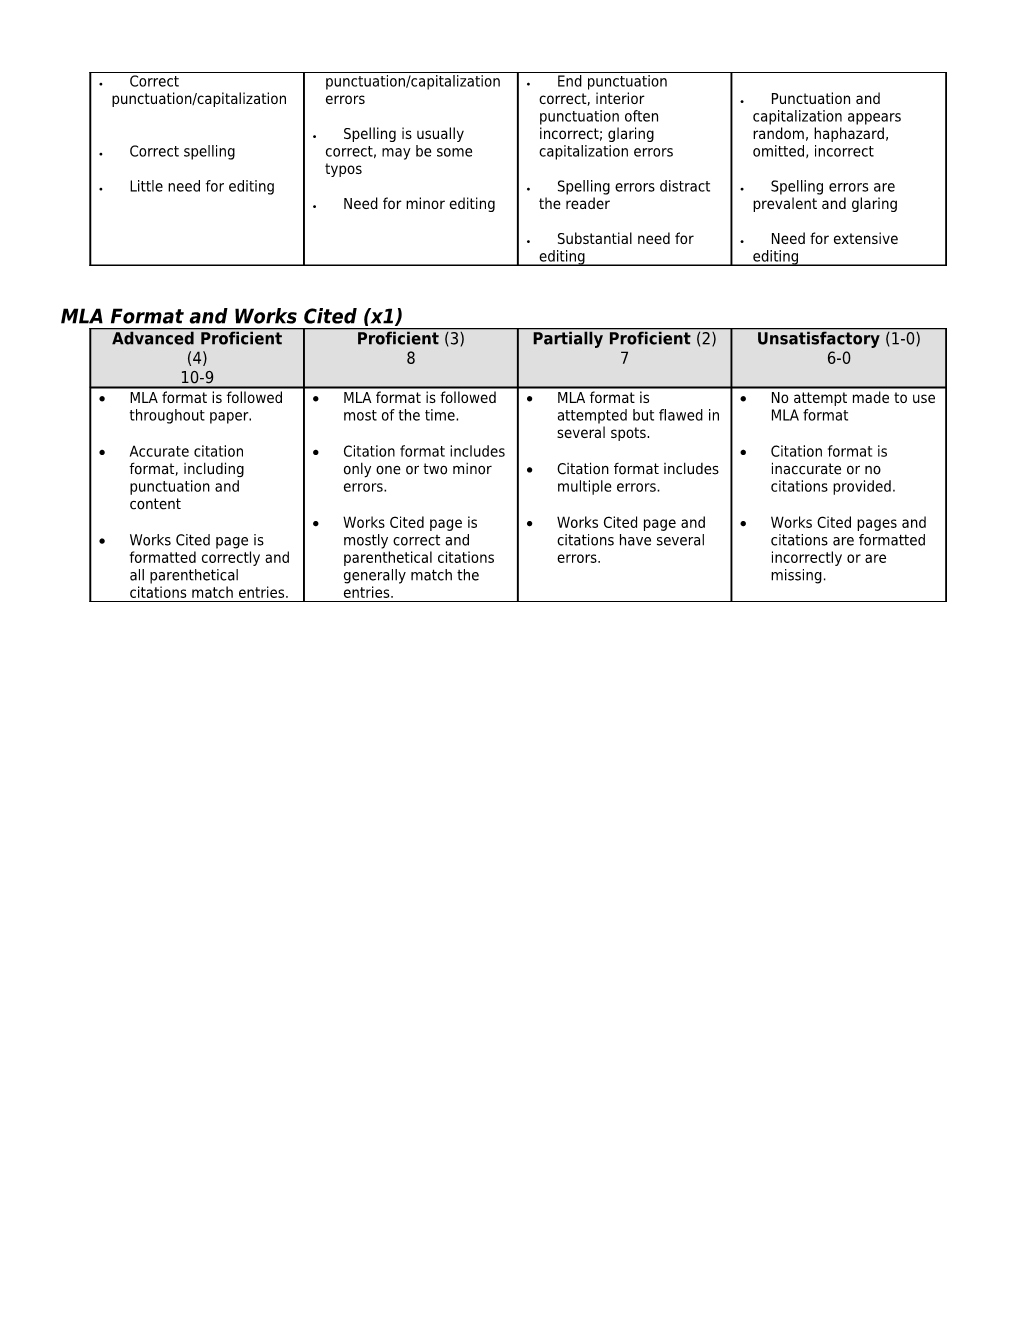 Peace and Justice Essay Final Draft Rubric